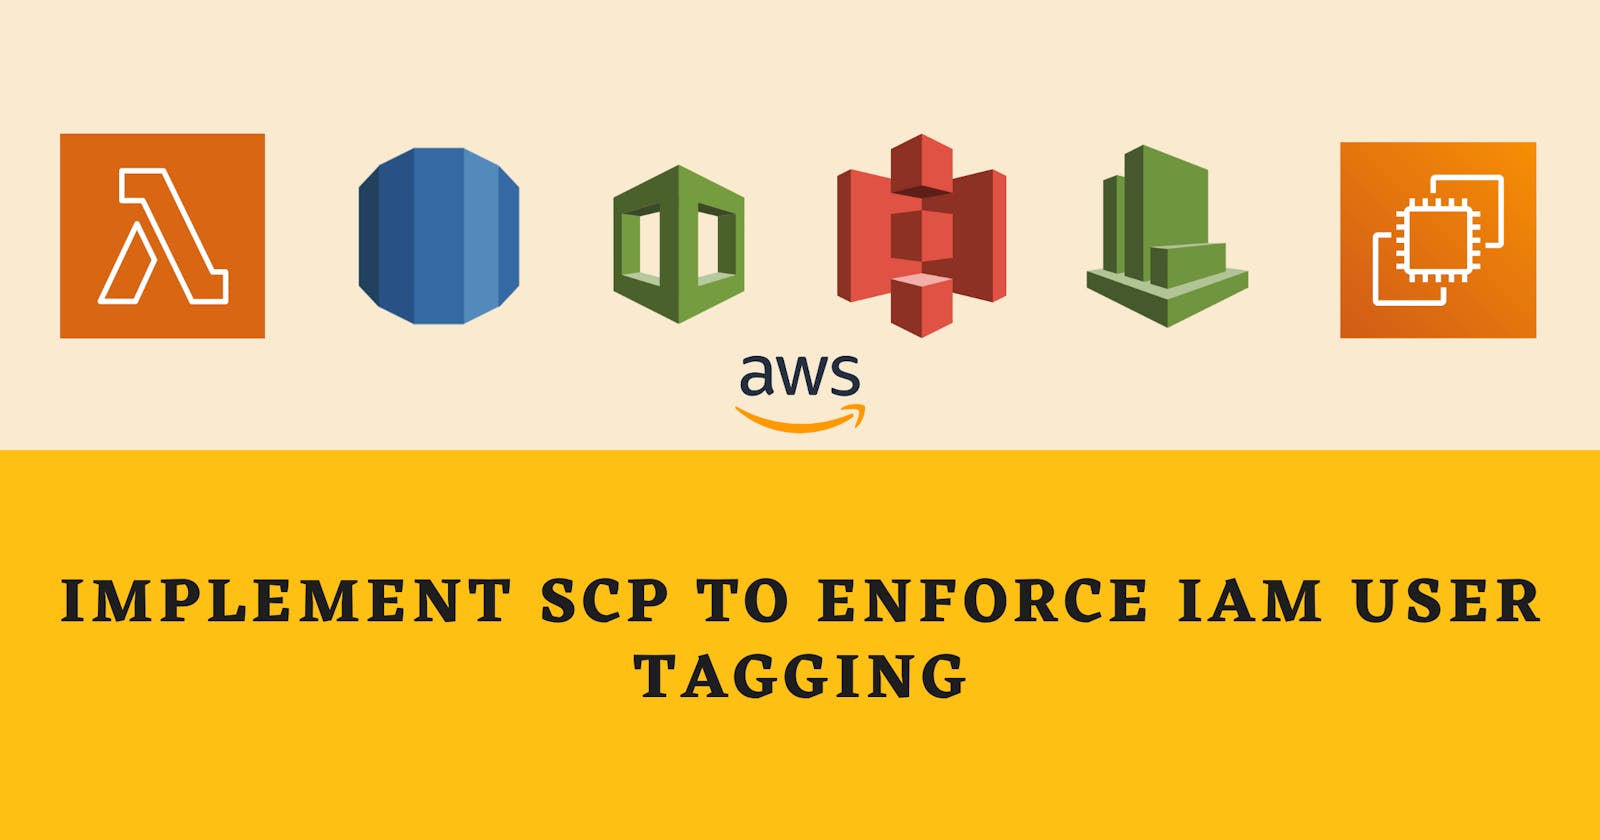 Implement SCP to enforce IAM user tagging